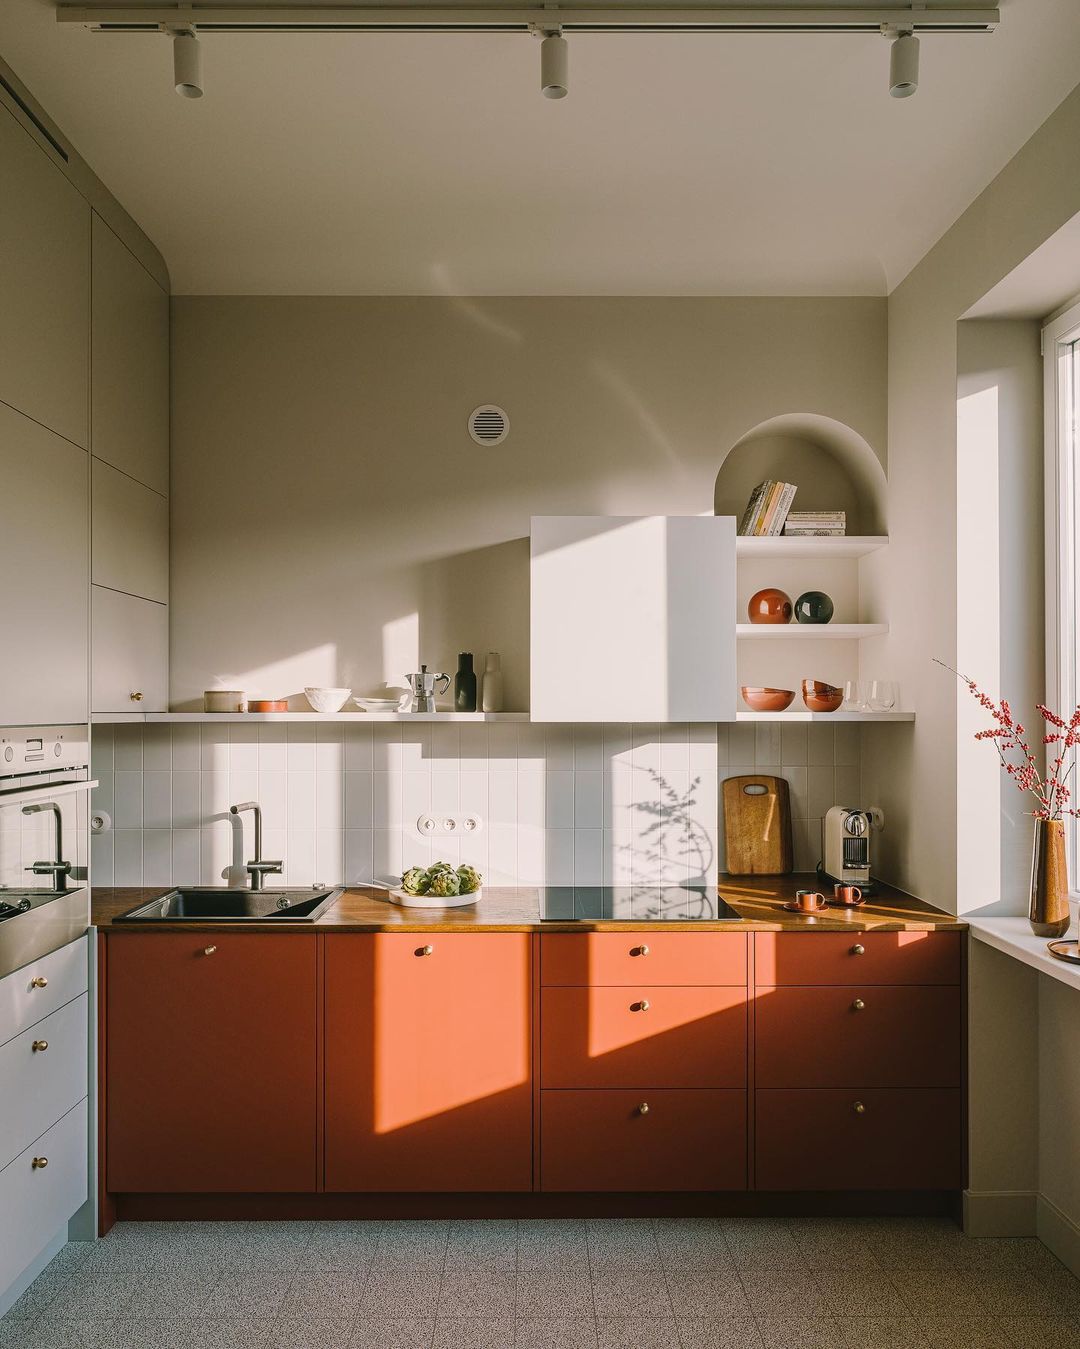 light pours into the warm and mostly neutral kitchen. photograph by pion courte 9